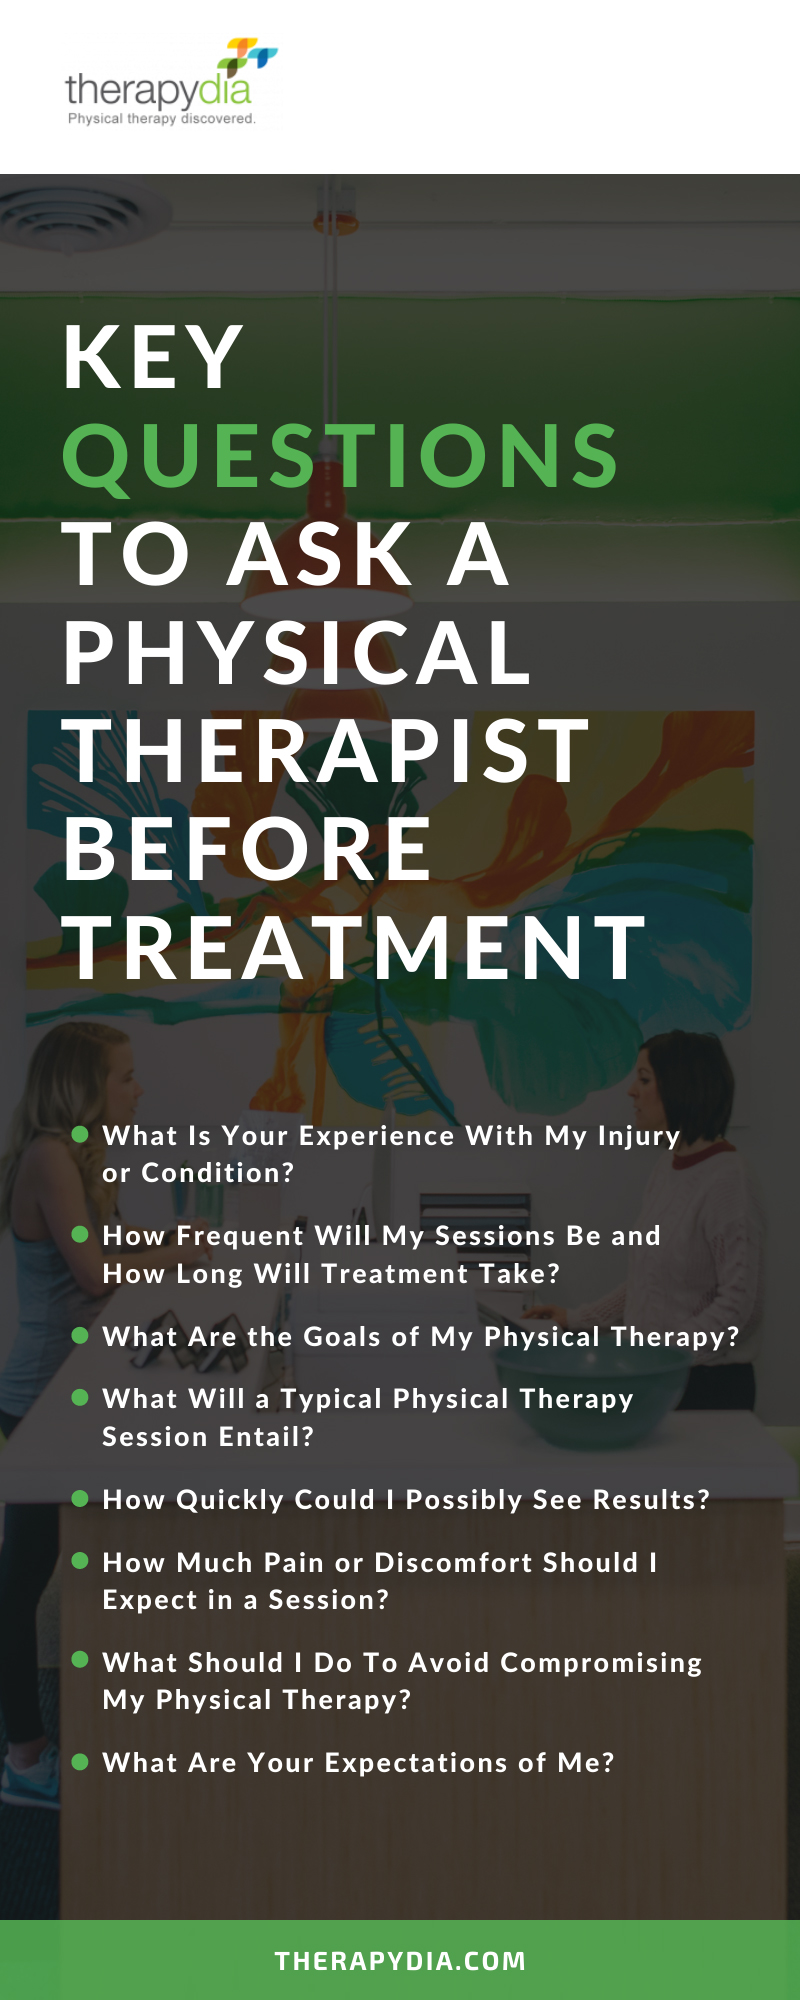 Key Questions To Ask a Physical Therapist Before Treatment